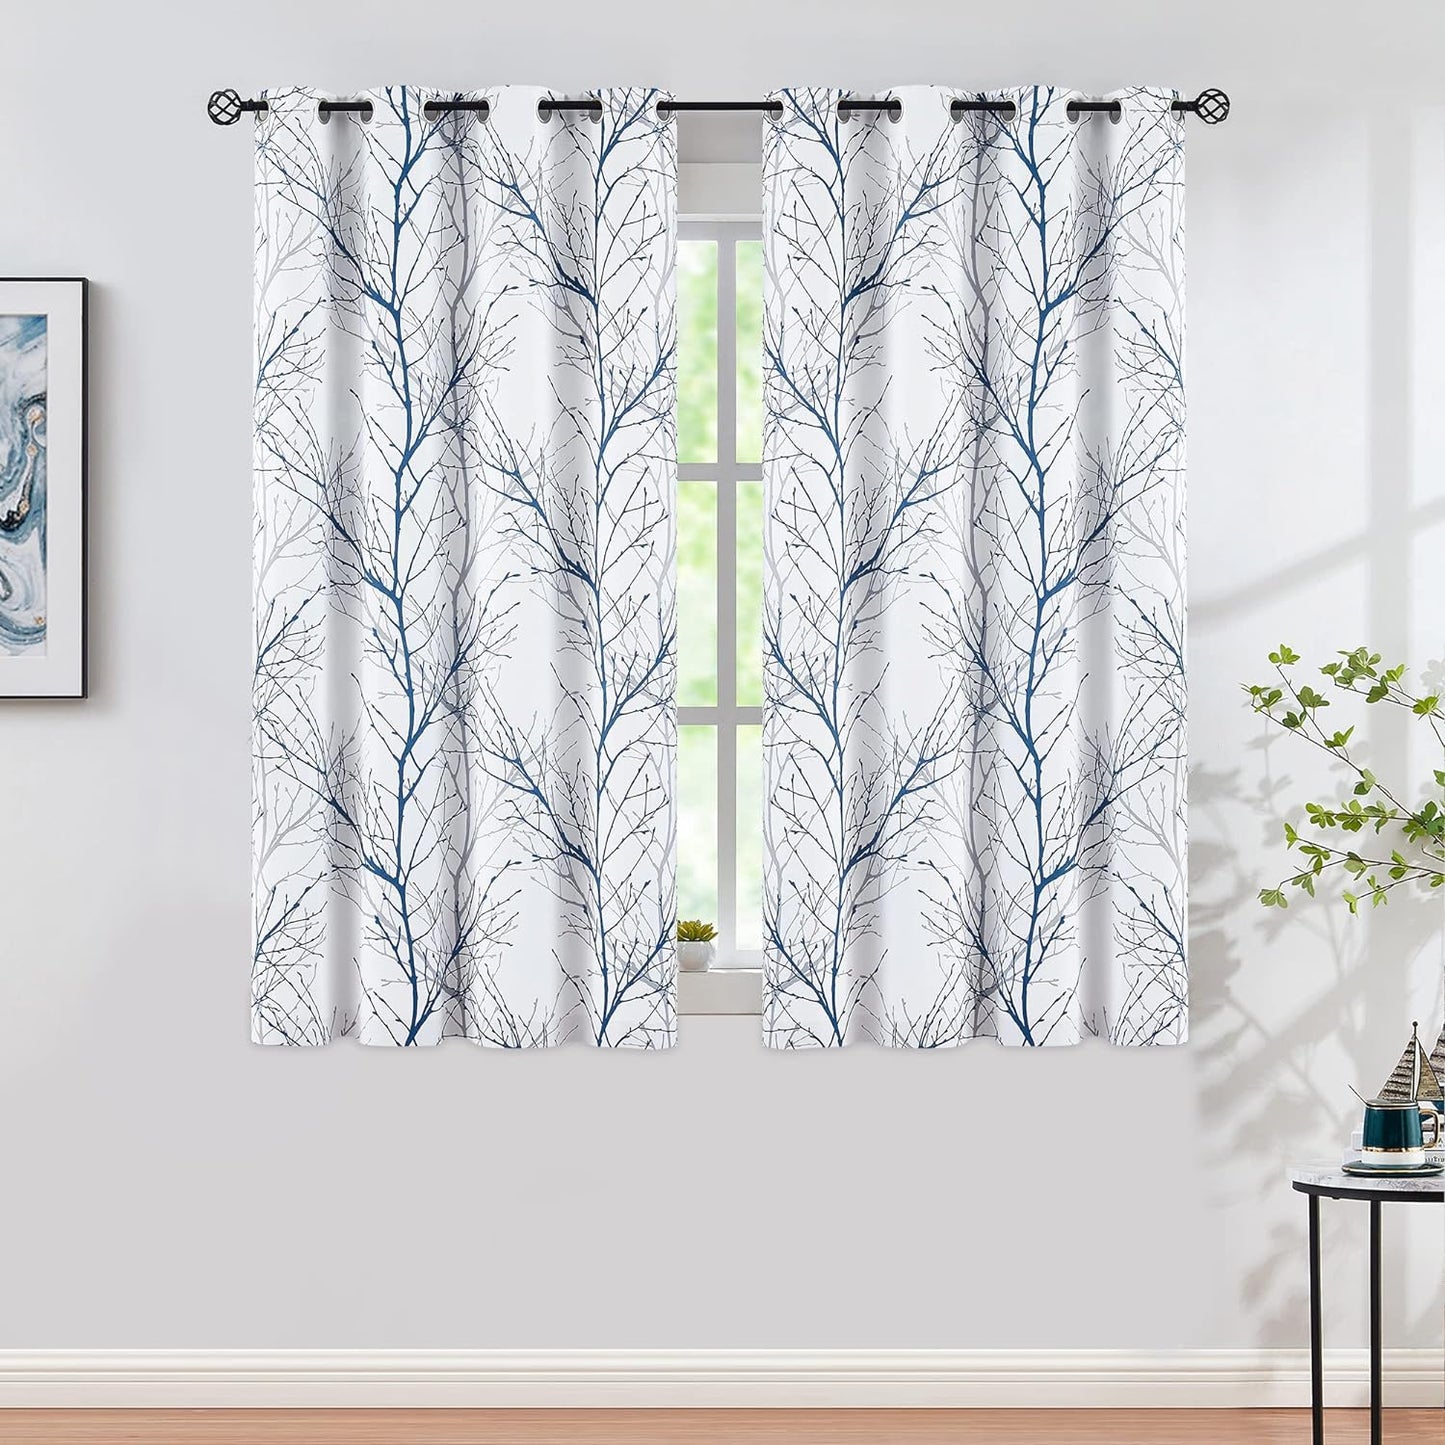 Blue White Blackout Curtains for Bedroom 63" Length Tonal Blue Grey Tree Branch Print Thermal Insulated Full Blackout Curtain Panels for Living Room Triple Weave Window Drapes 50"W 2Panels Grommet Top  Fmfunctex   